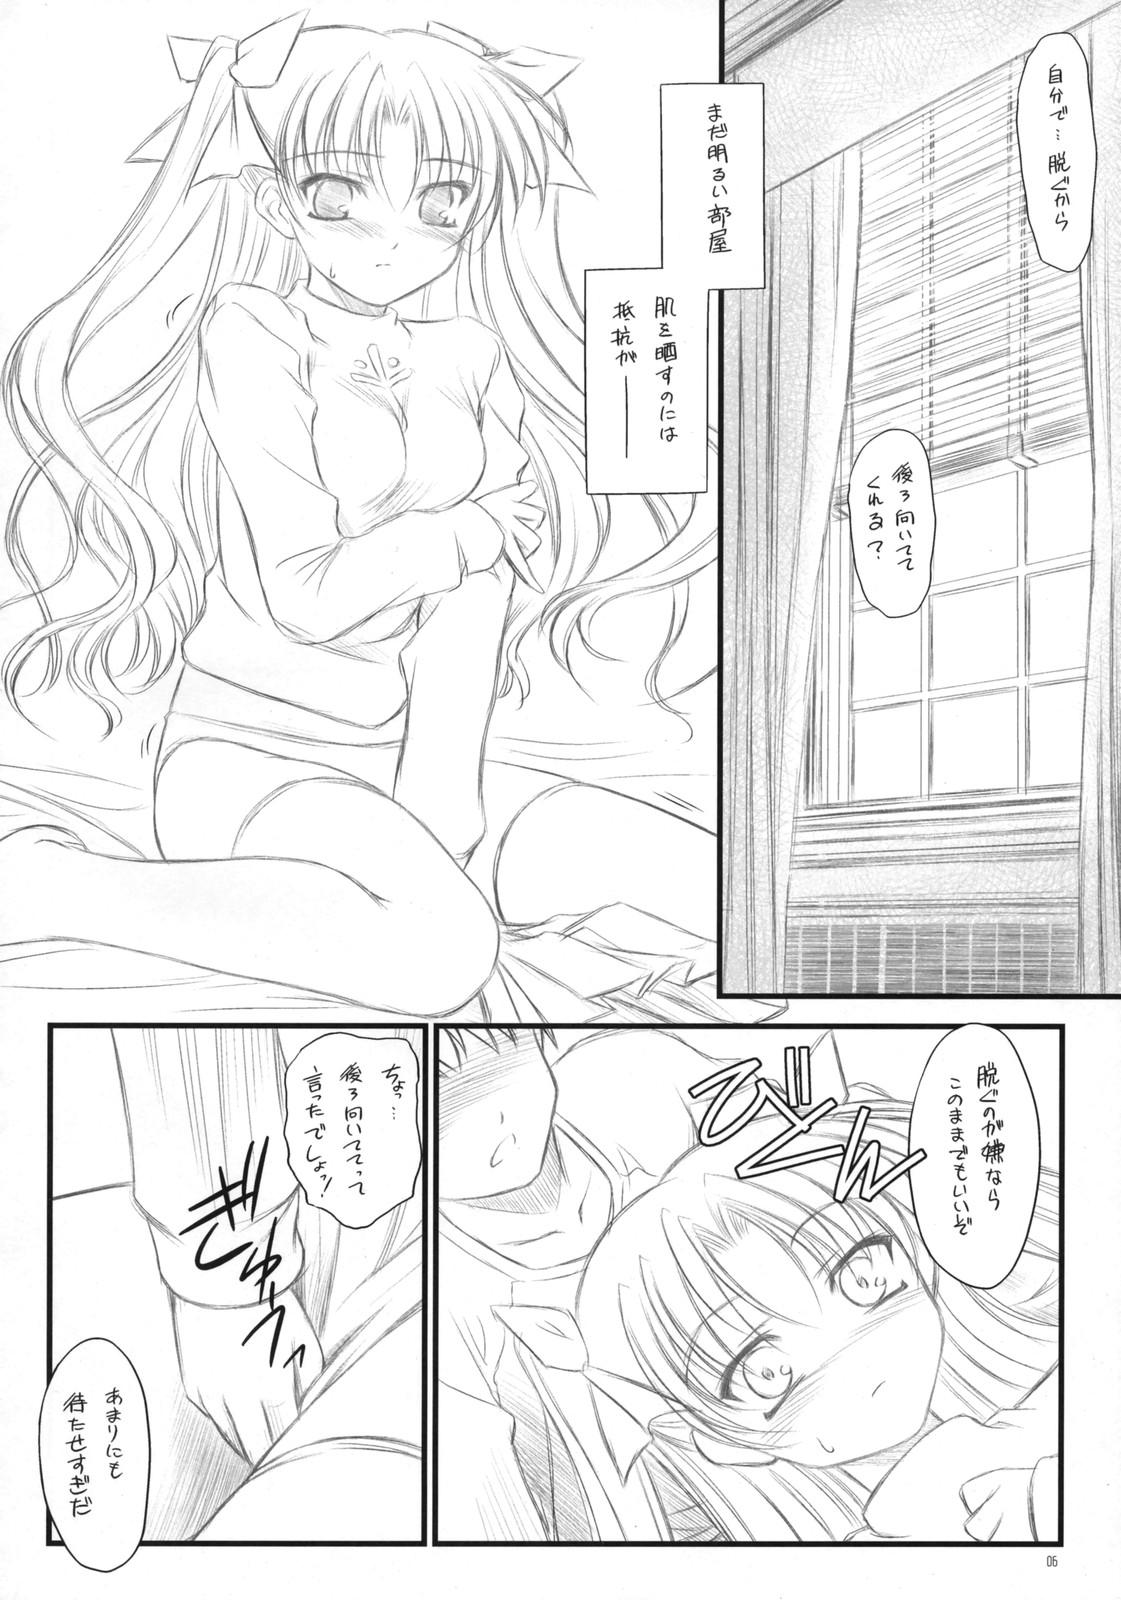 Reality Prunus Persica - Fate stay night Gloryholes - Page 5